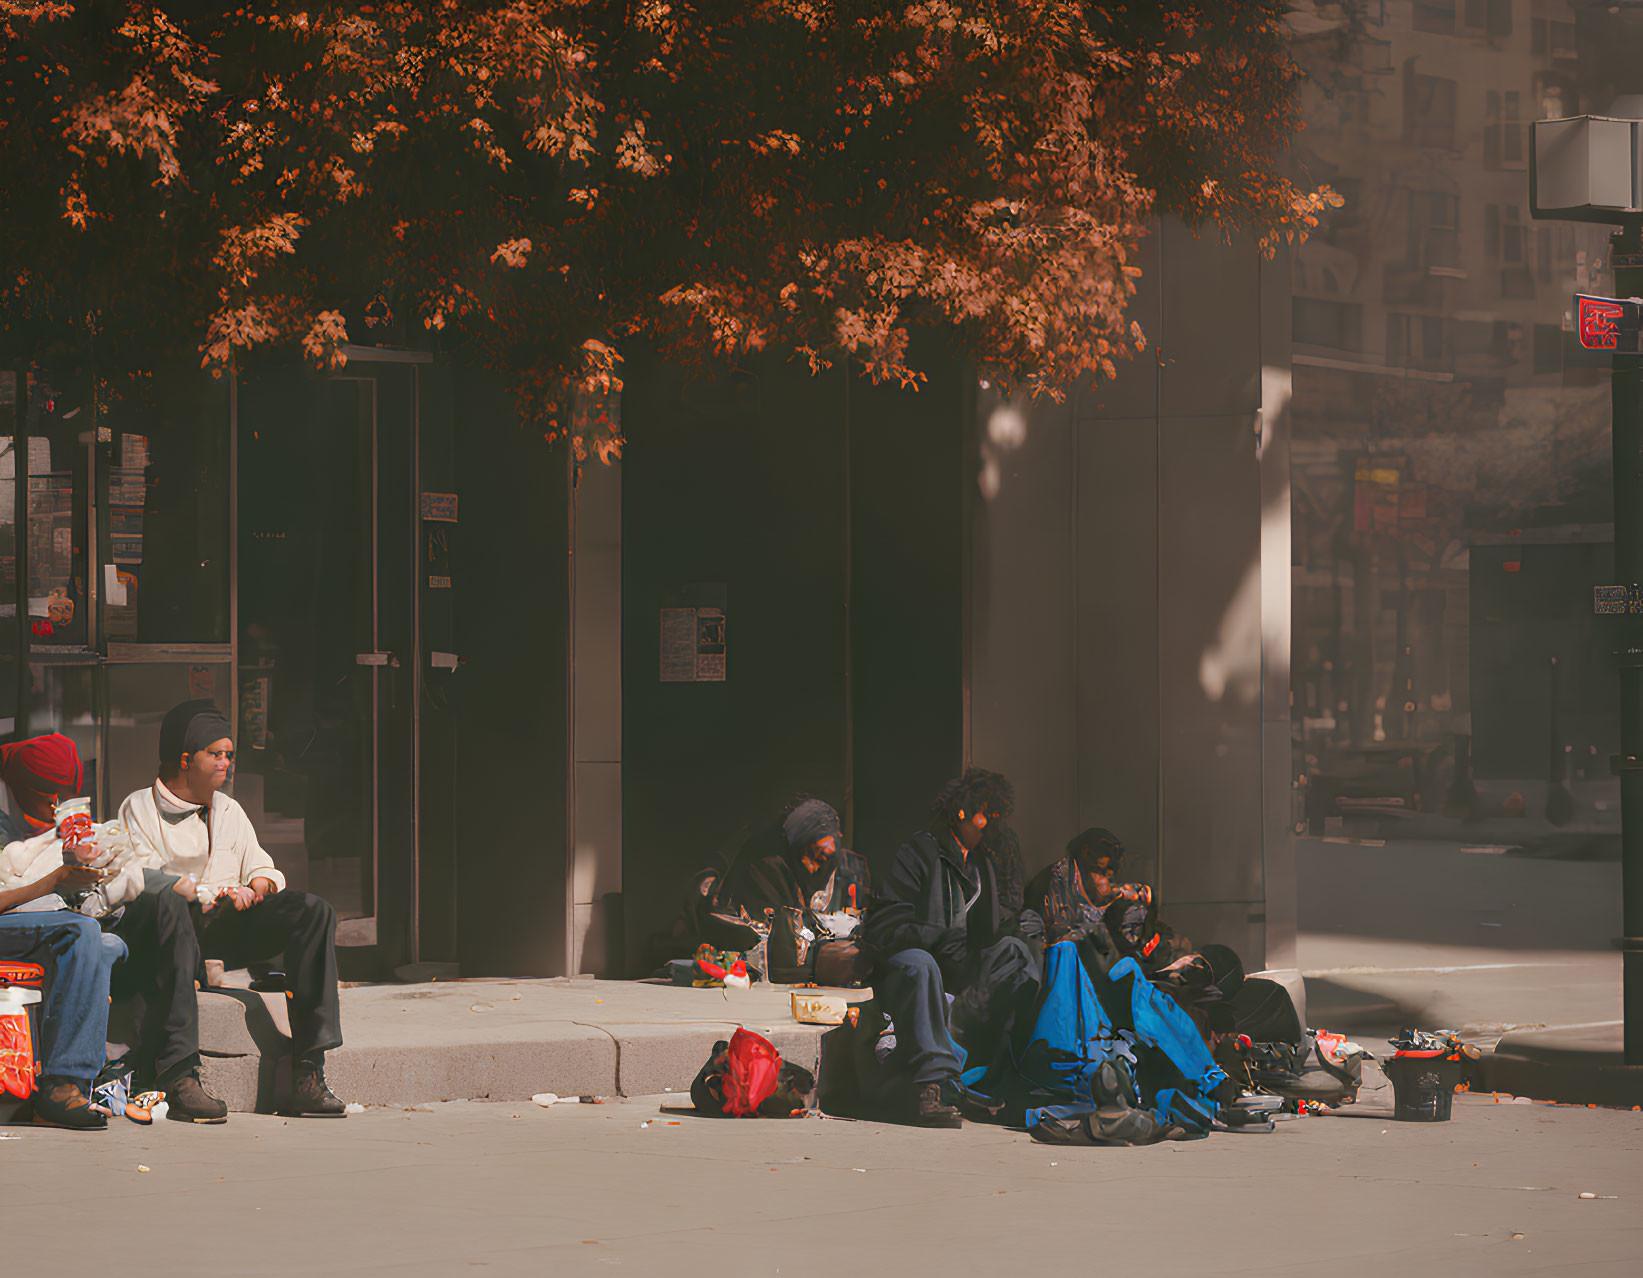 City sidewalk scene with people under autumn trees and scattered belongings